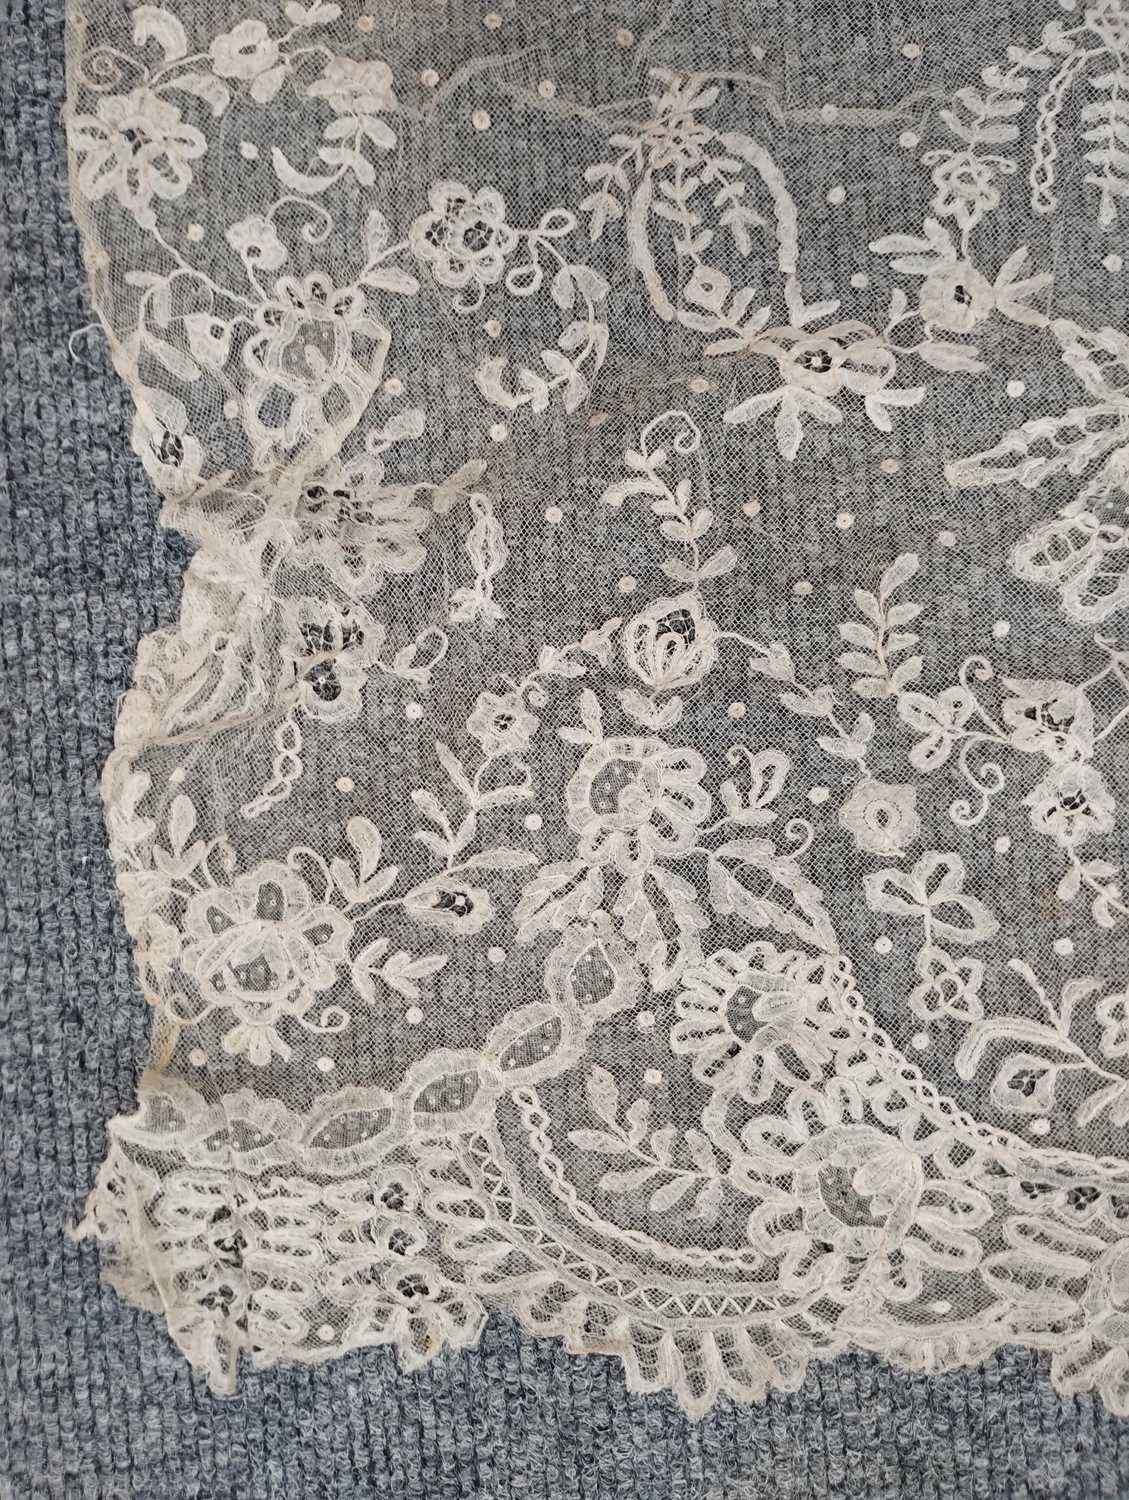 Early 20th Century Lace comprising a flounce with appliquéd flower heads and motifs within a - Image 26 of 32